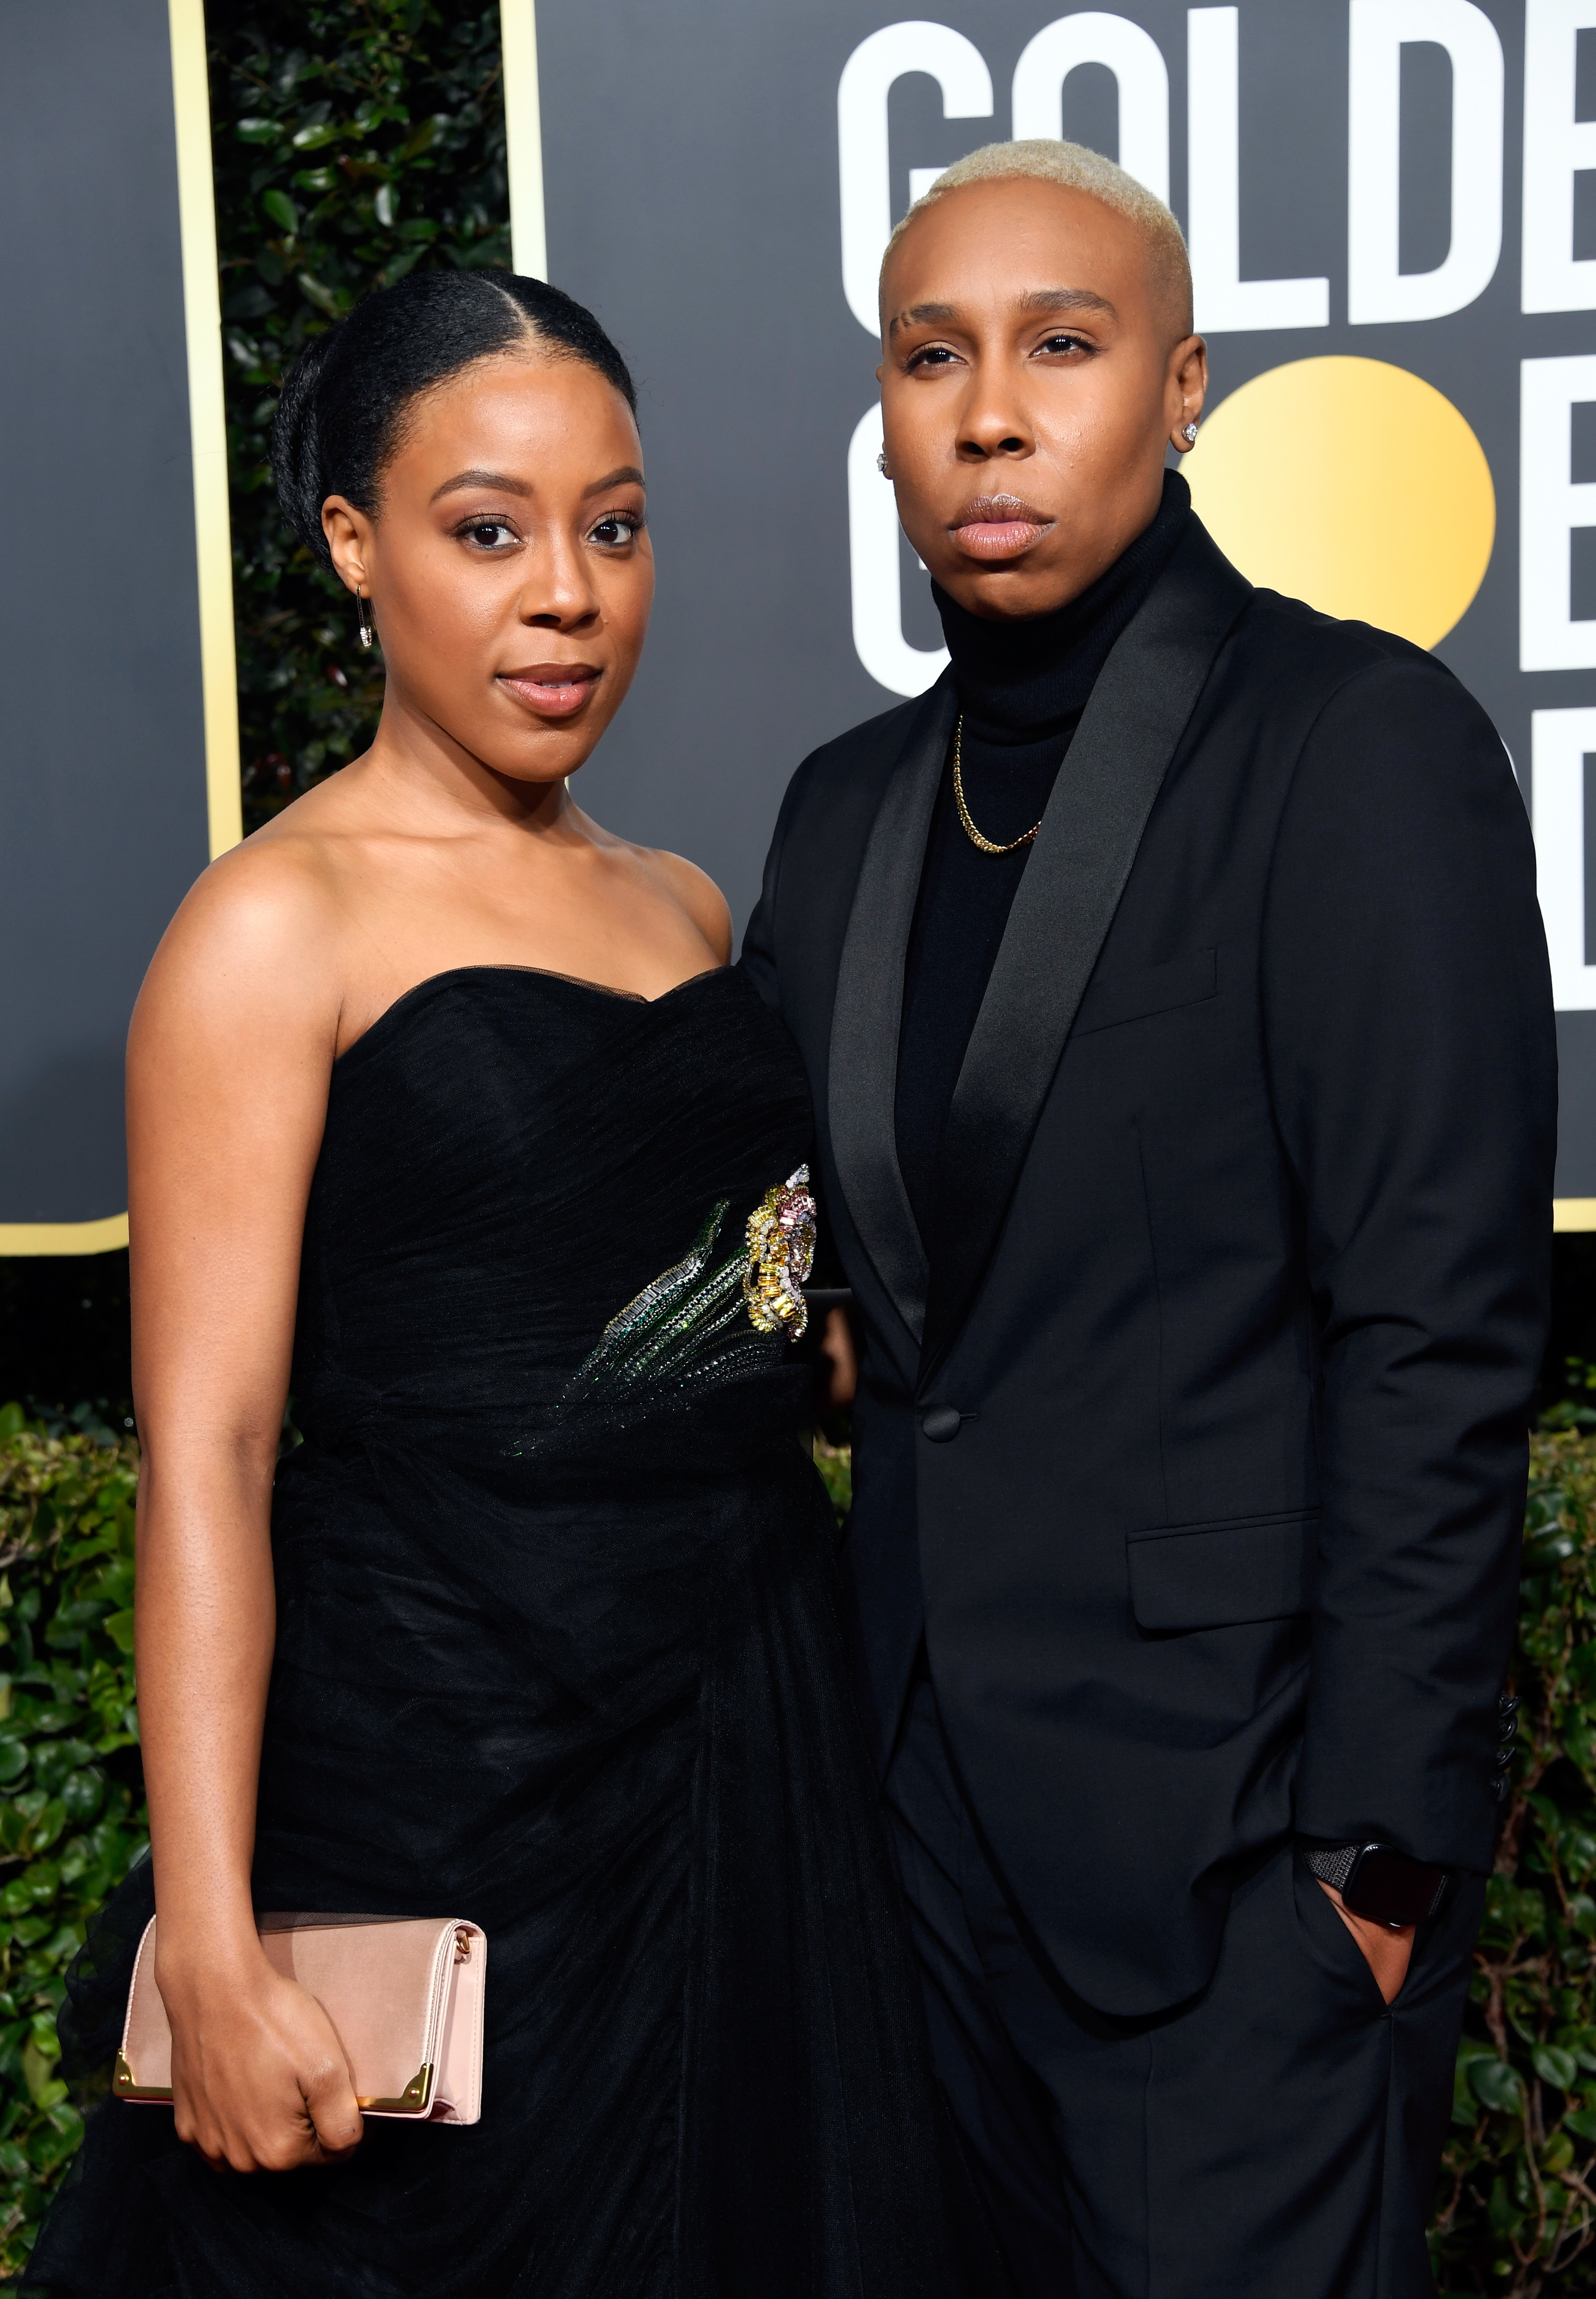 Two people posing at the Golden Globes, one in a black dress and clutch, the other in a black suit